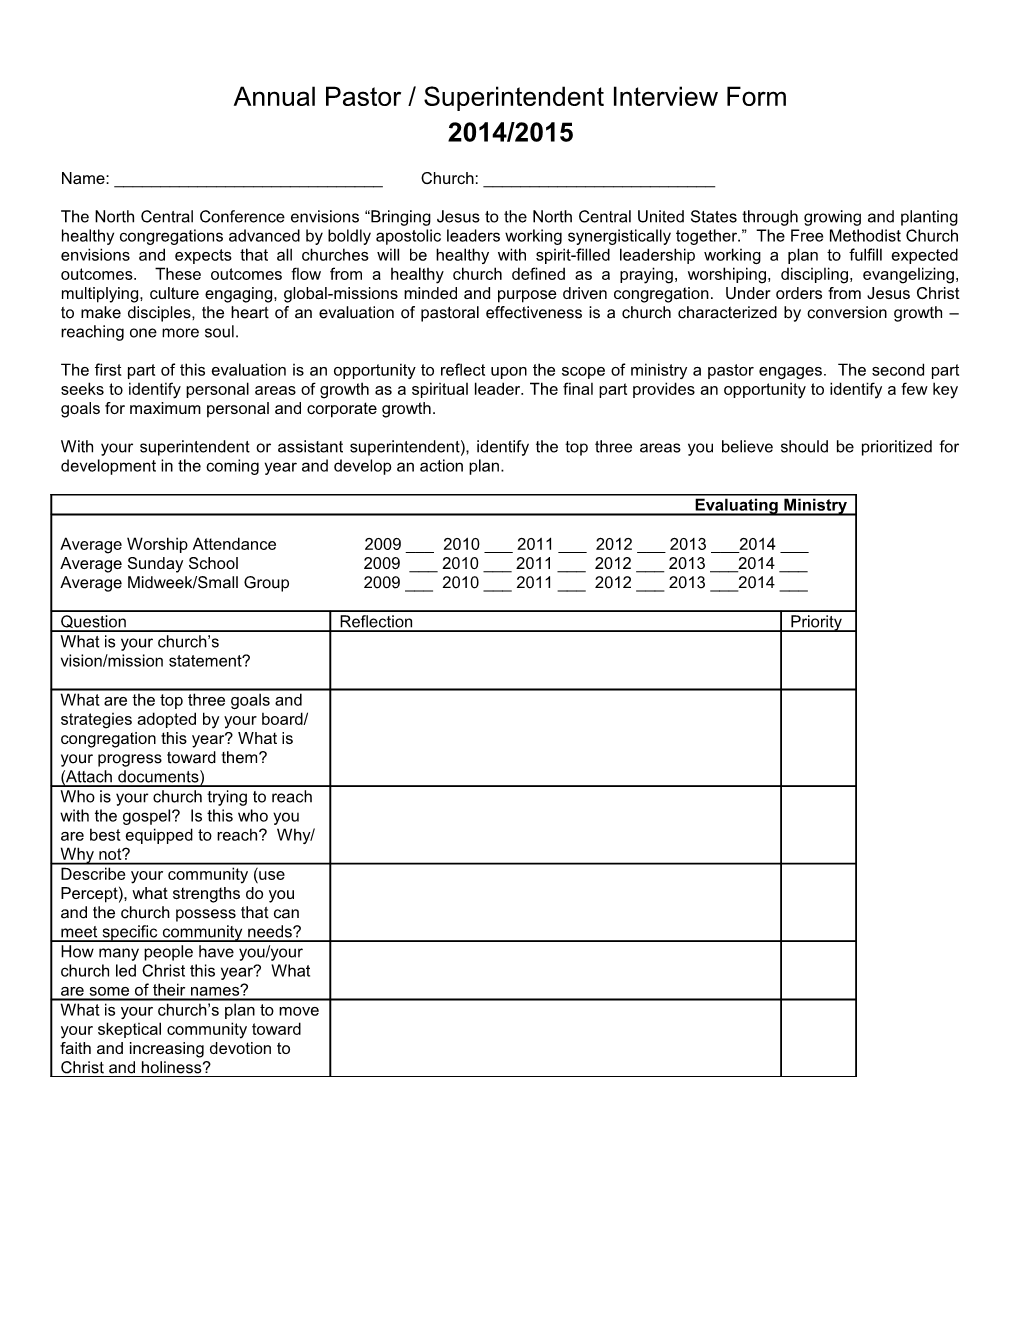 Annual Pastor / Superintendent Interview Form